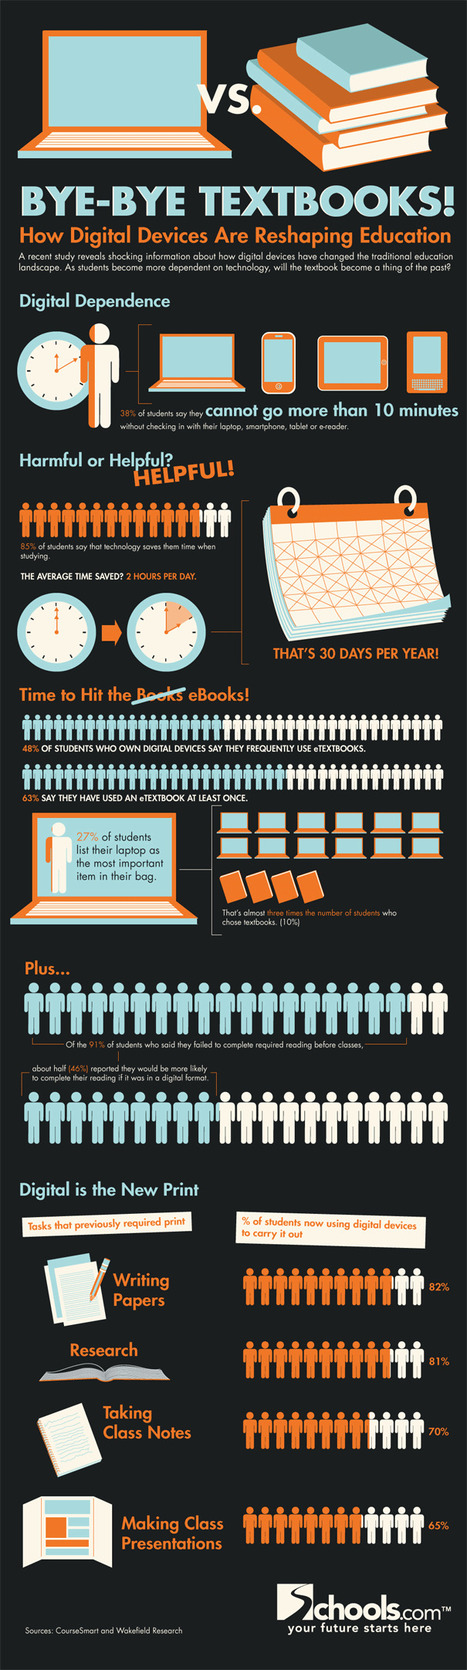 Bye-Bye Textbooks! How Digital Devices Are Reshaping Education Infographic | Didactics and Technology in Education | Scoop.it